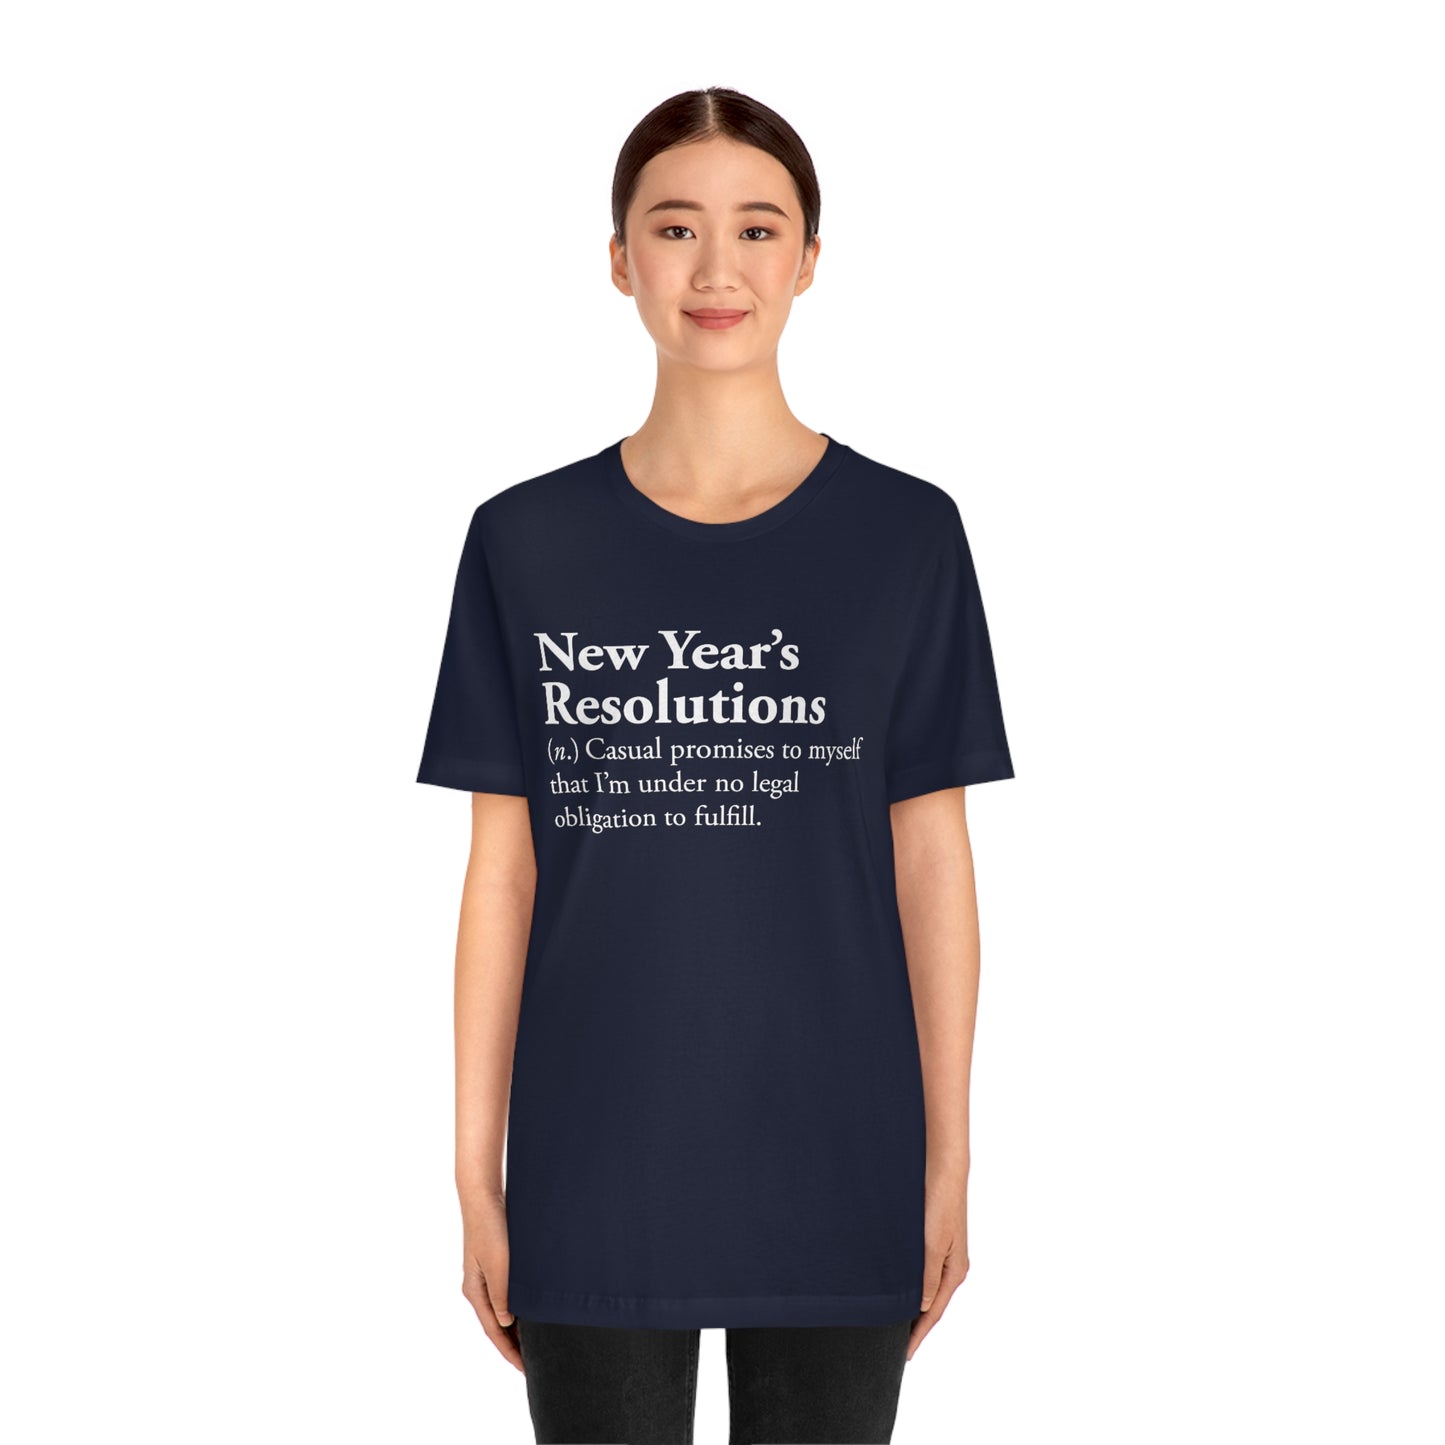 New Year's Resolutions Definition Shirt, New Year's Resolutions Meaning Shirt, Funny New Year Shirt, Sarcastic New Year Shirt